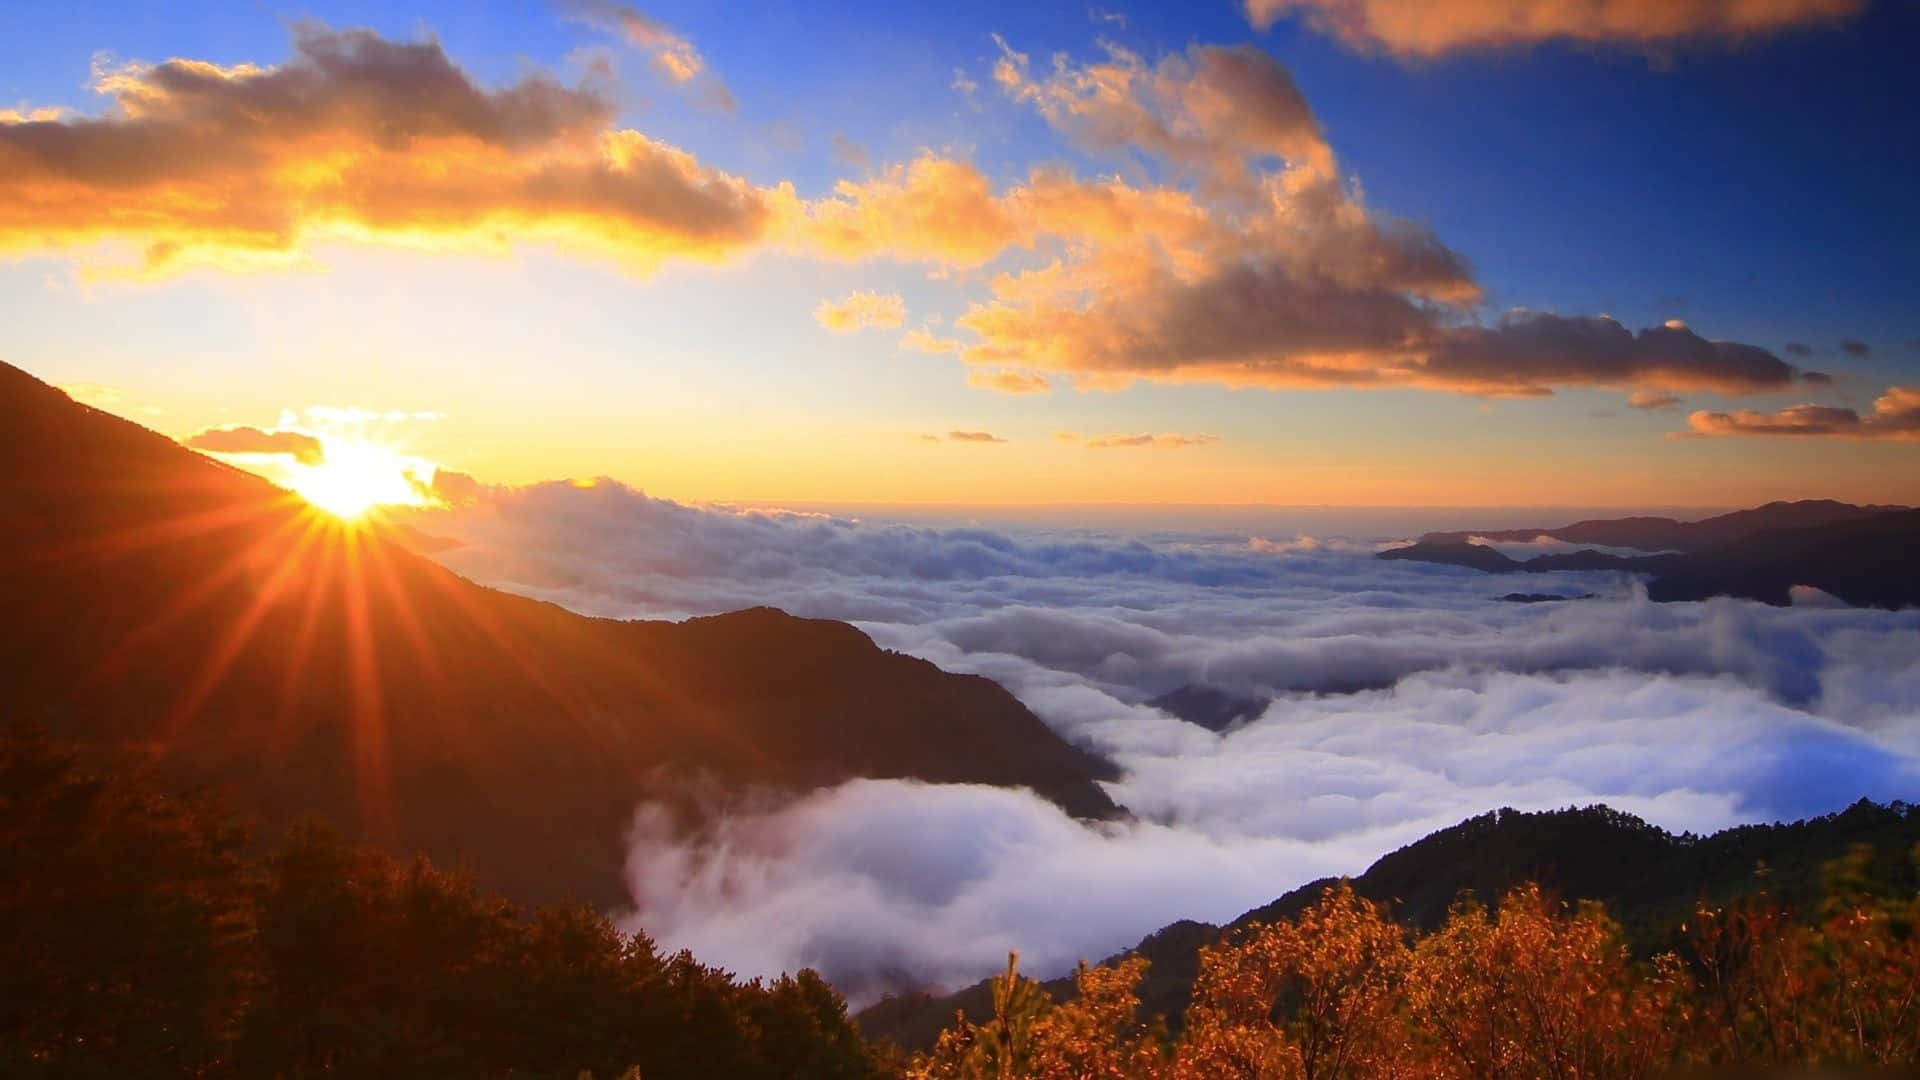 A Sunrise Over Clouds In The Mountains